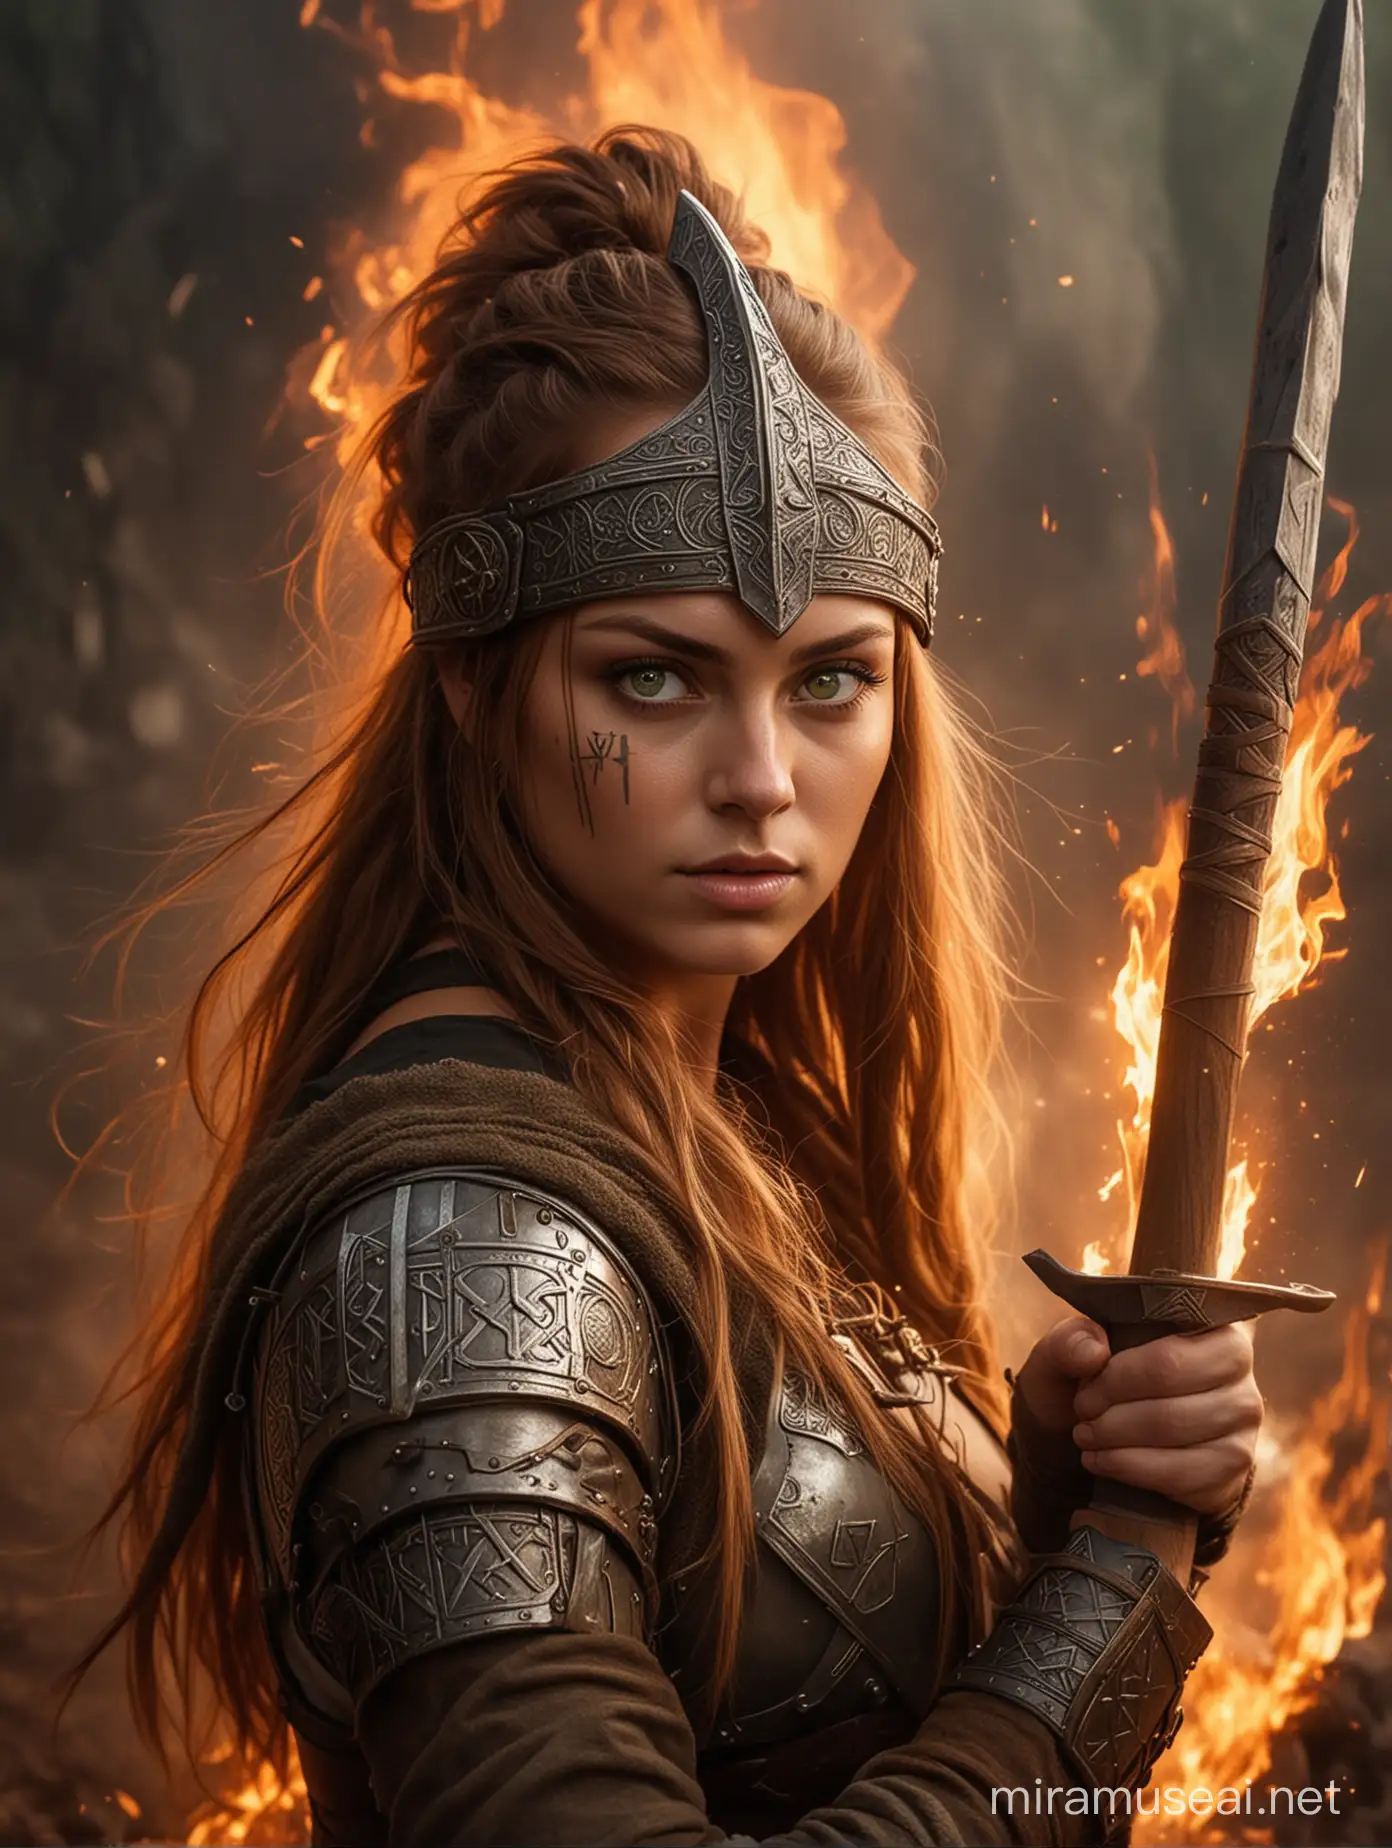 a walkure as a beautiful light brown hair green eyes young woman armed with germanic spear the blade of which is decorated with Futhark runes, wearing an ancient germanic helmet and a shield is in a middle of a cercle of fierce fire flames